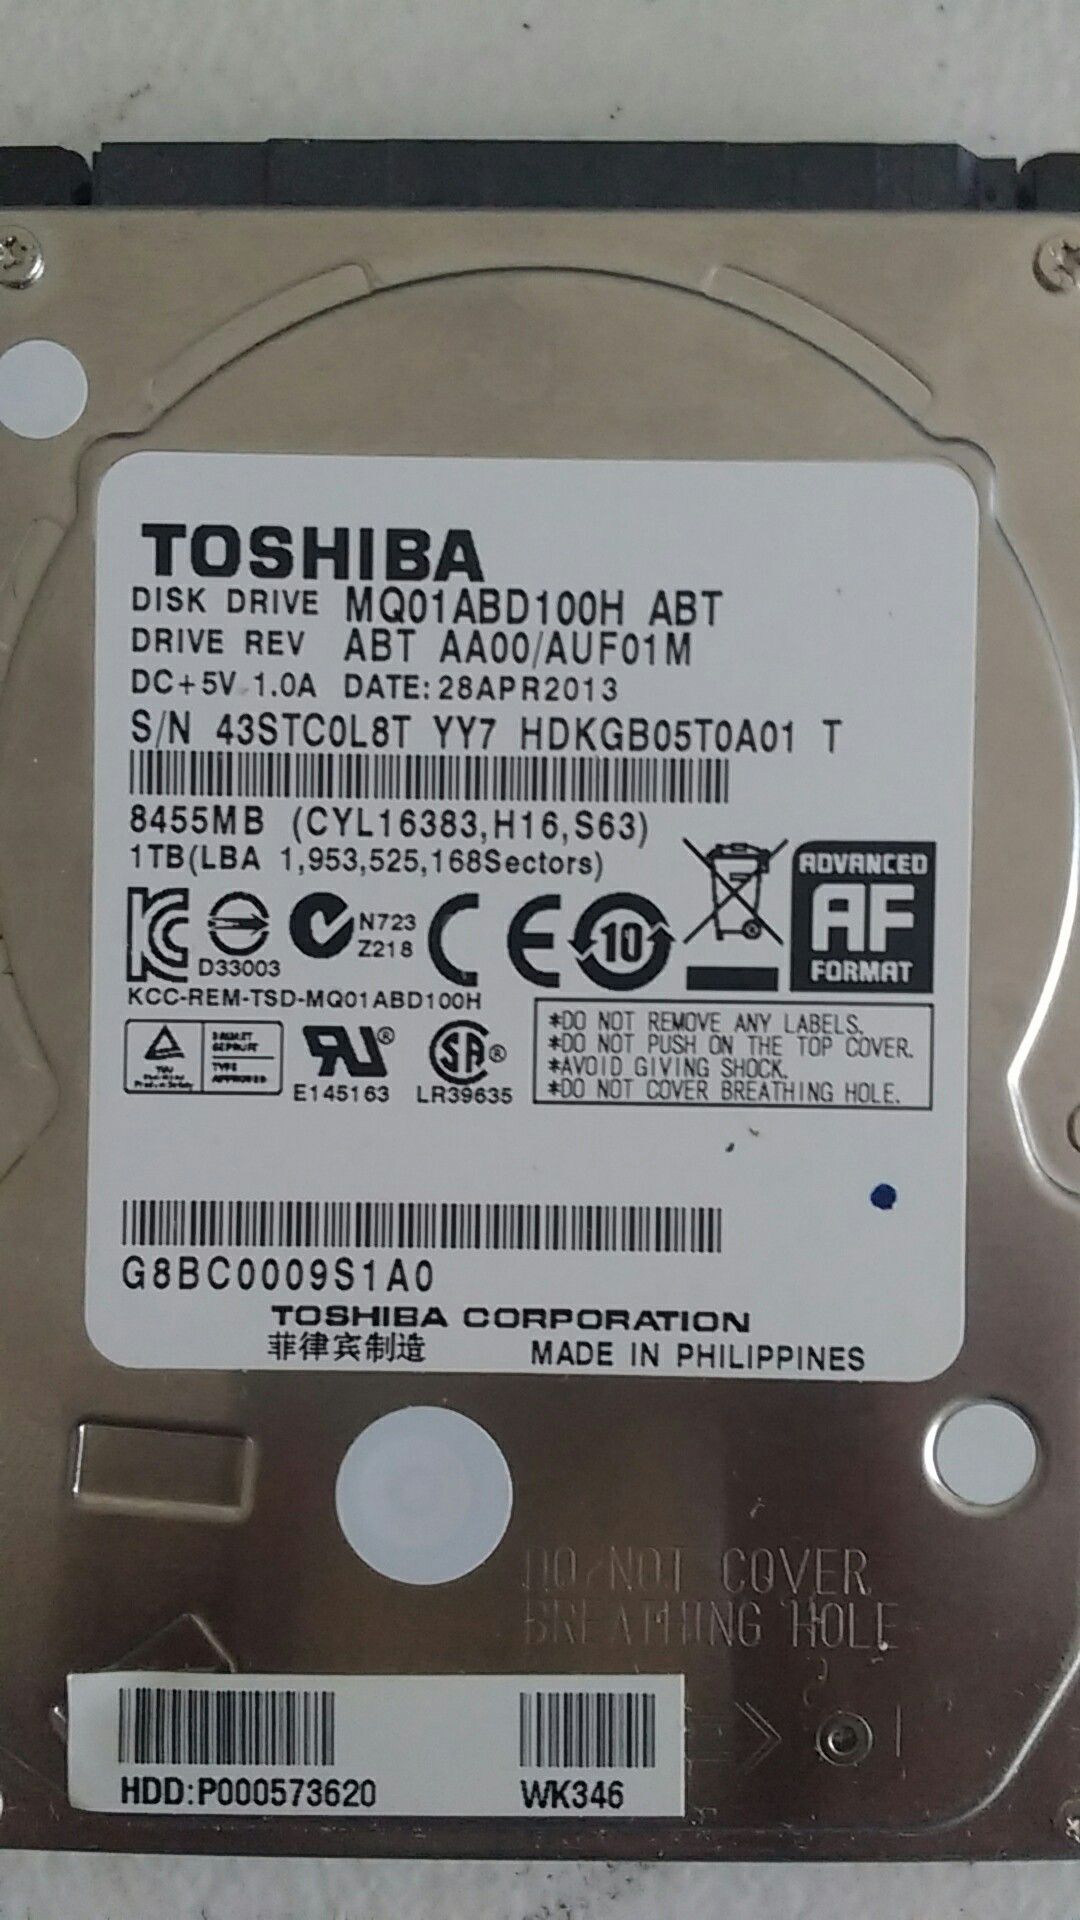 1TB HDD taken out of a Toshiba Laptop